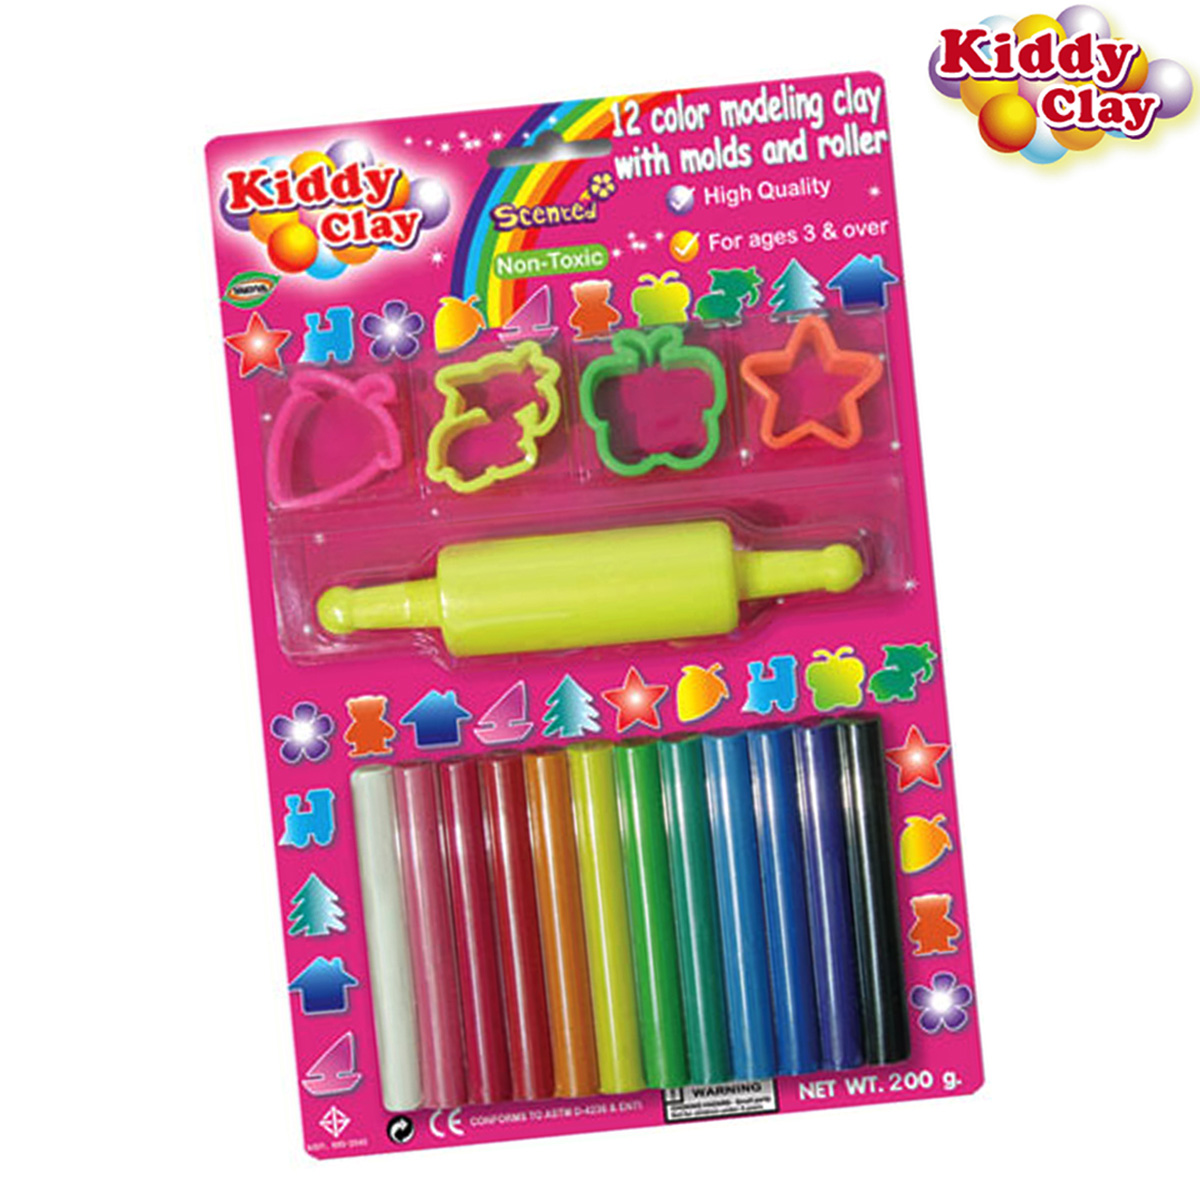 Kiddy Clay : 12 Colors of Clay+Mold/Roller 200 g.